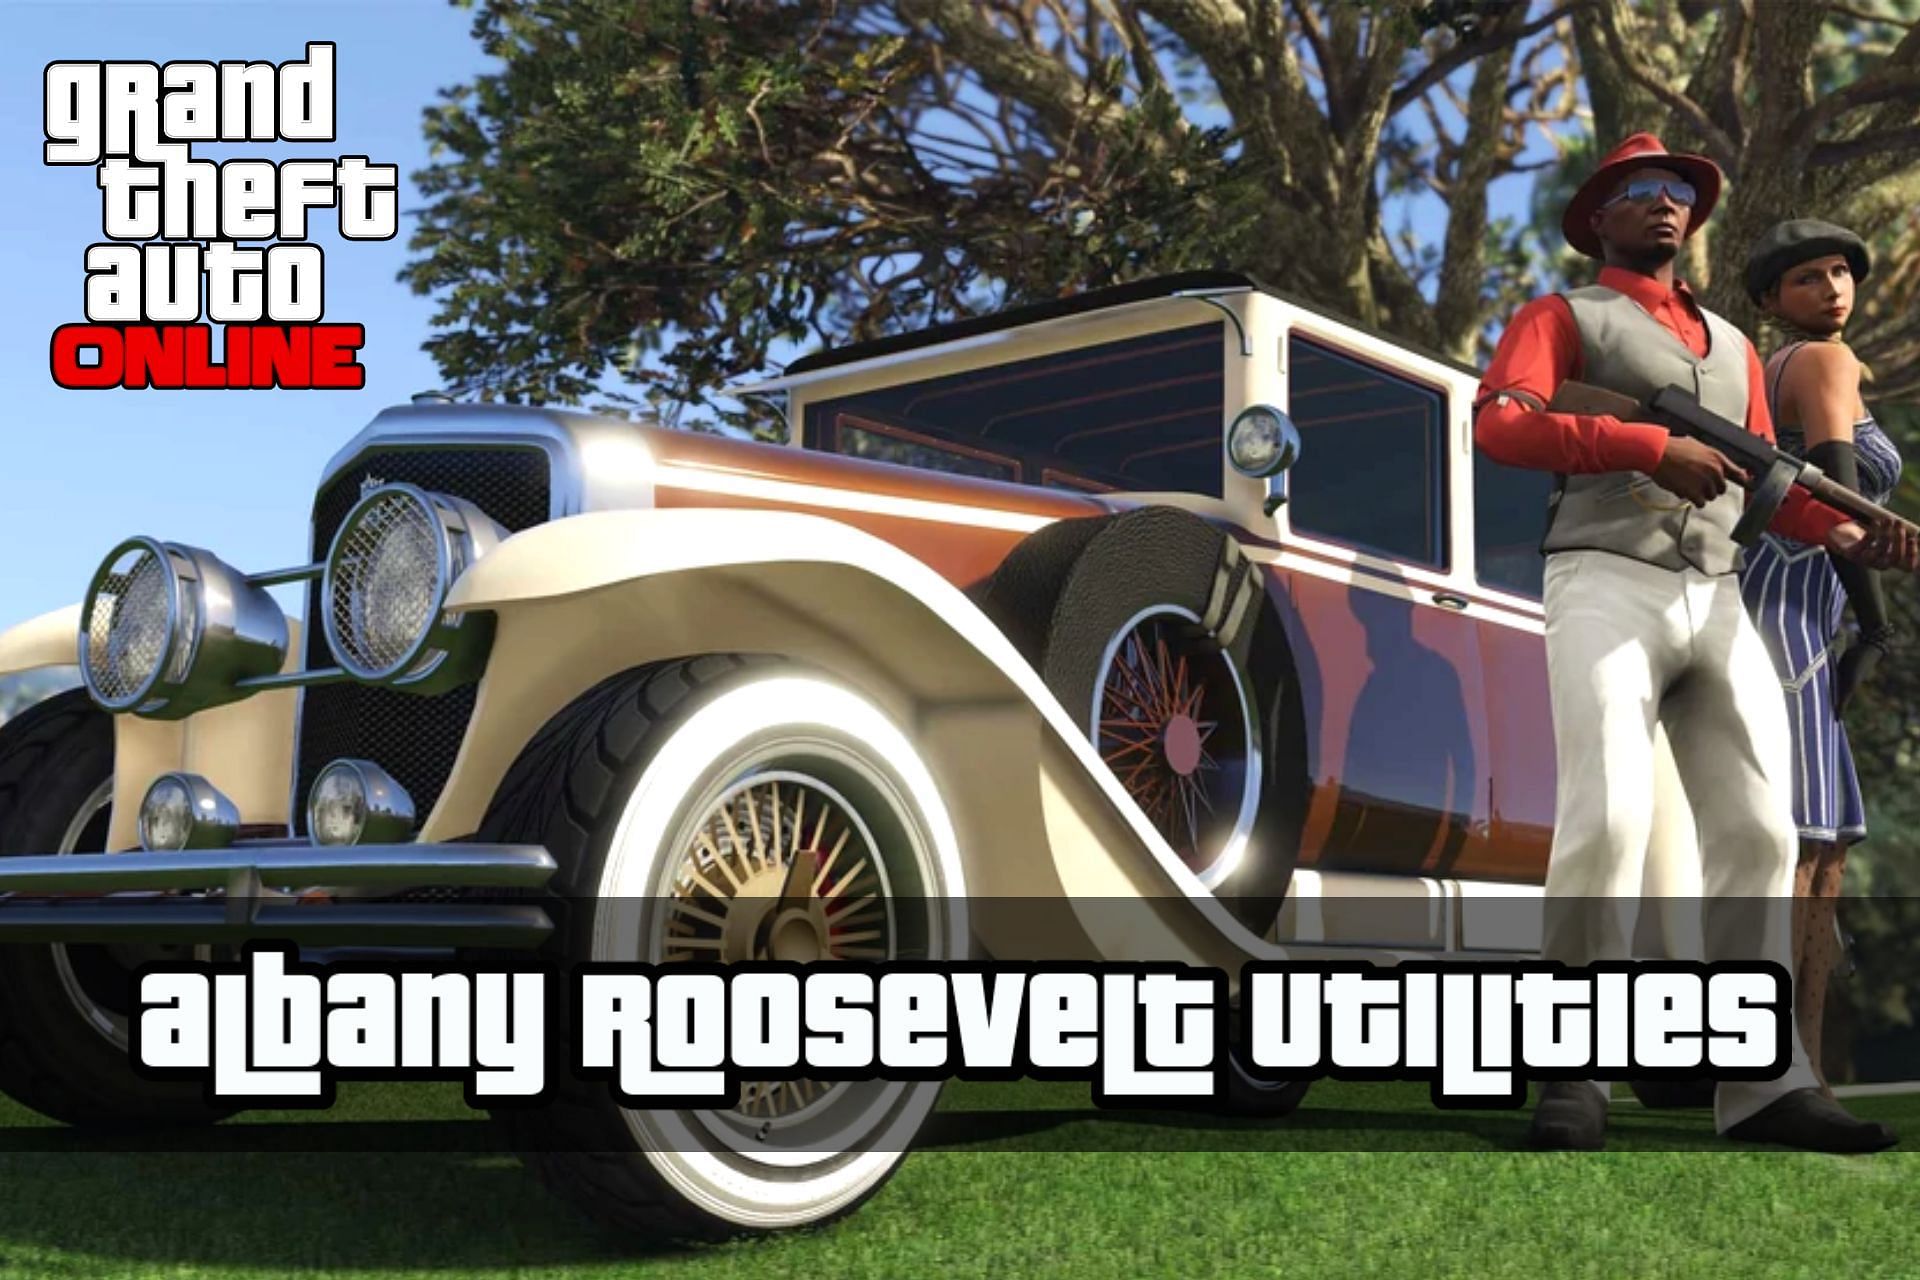 The Albany Roosevelt is a classy car to own in GTA Online (Image via Rockstar Games)